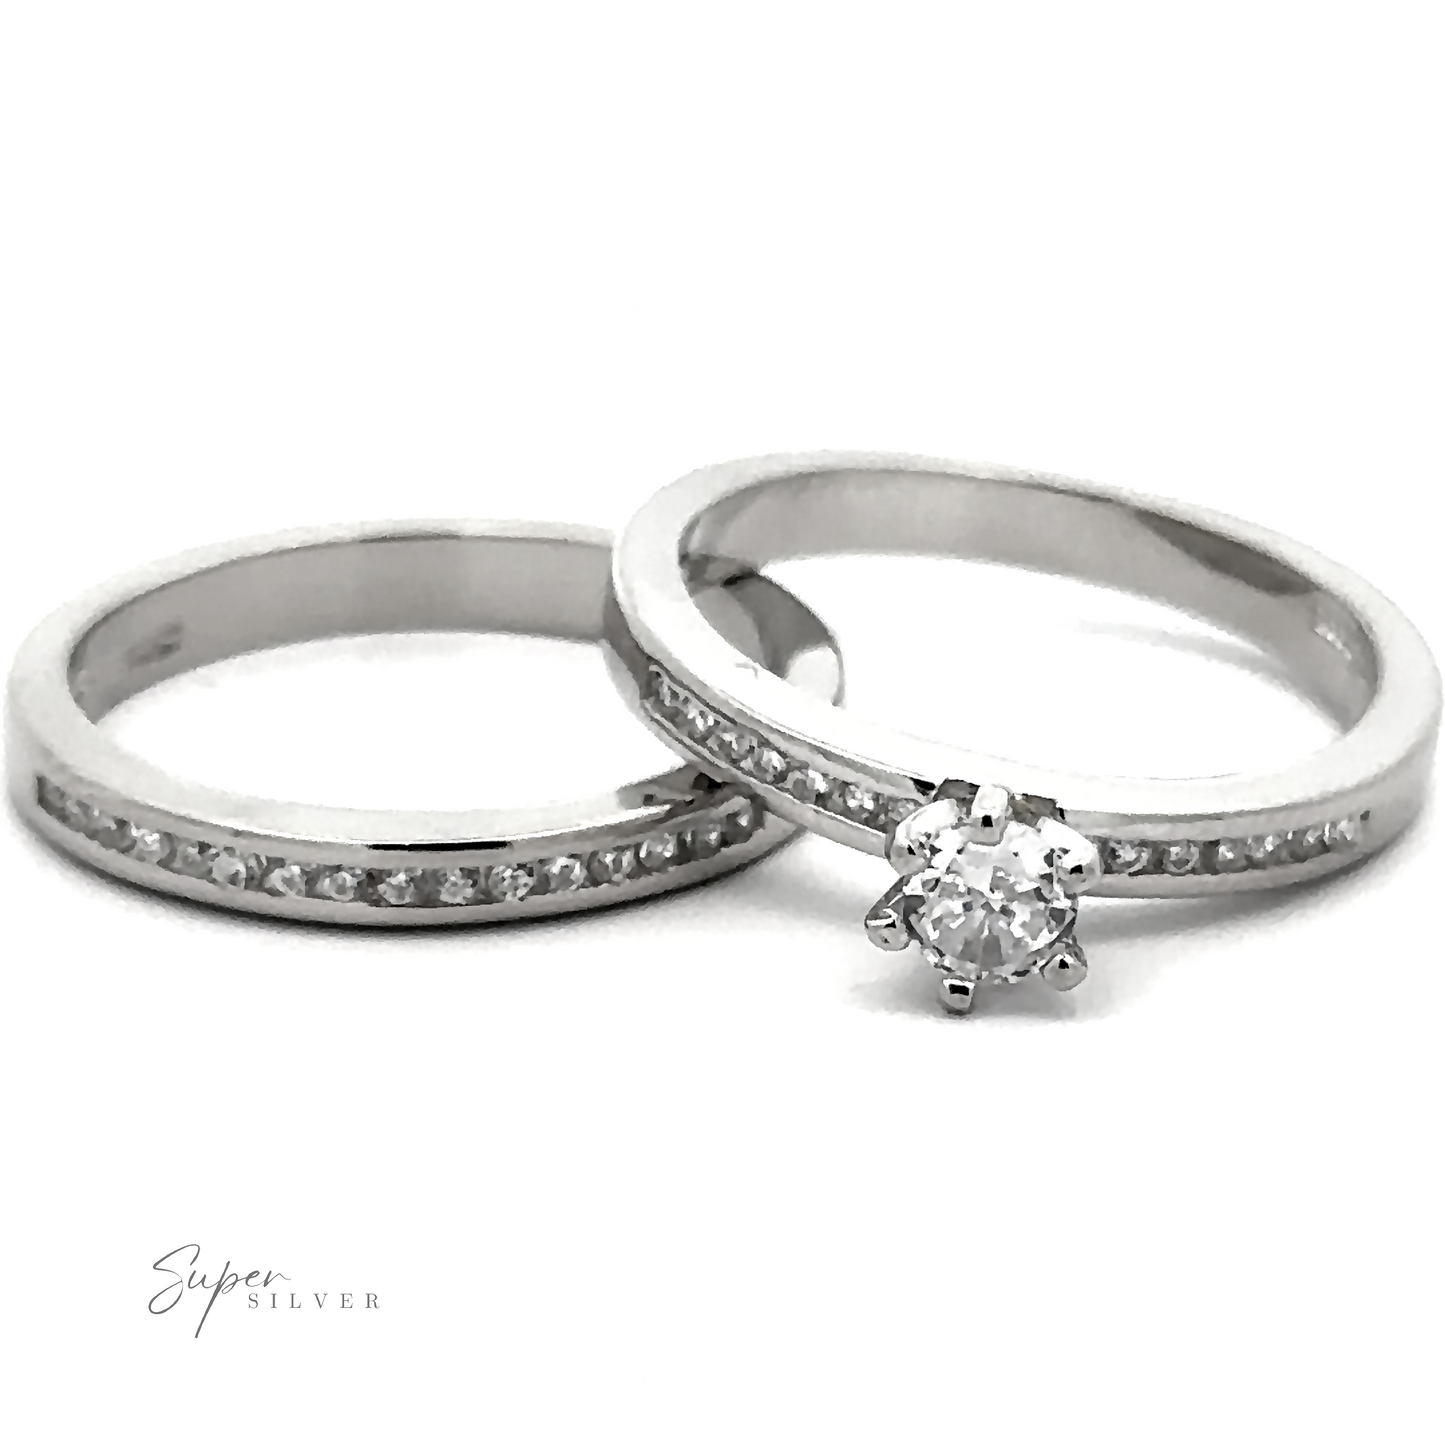 Two sterling silver rings: one with a solitaire diamond and the other, a round stone wedding band studded with Cubic Zirconia. Both rings are branded "Brilliant Round Cubic Zirconia Wedding Ring Set.